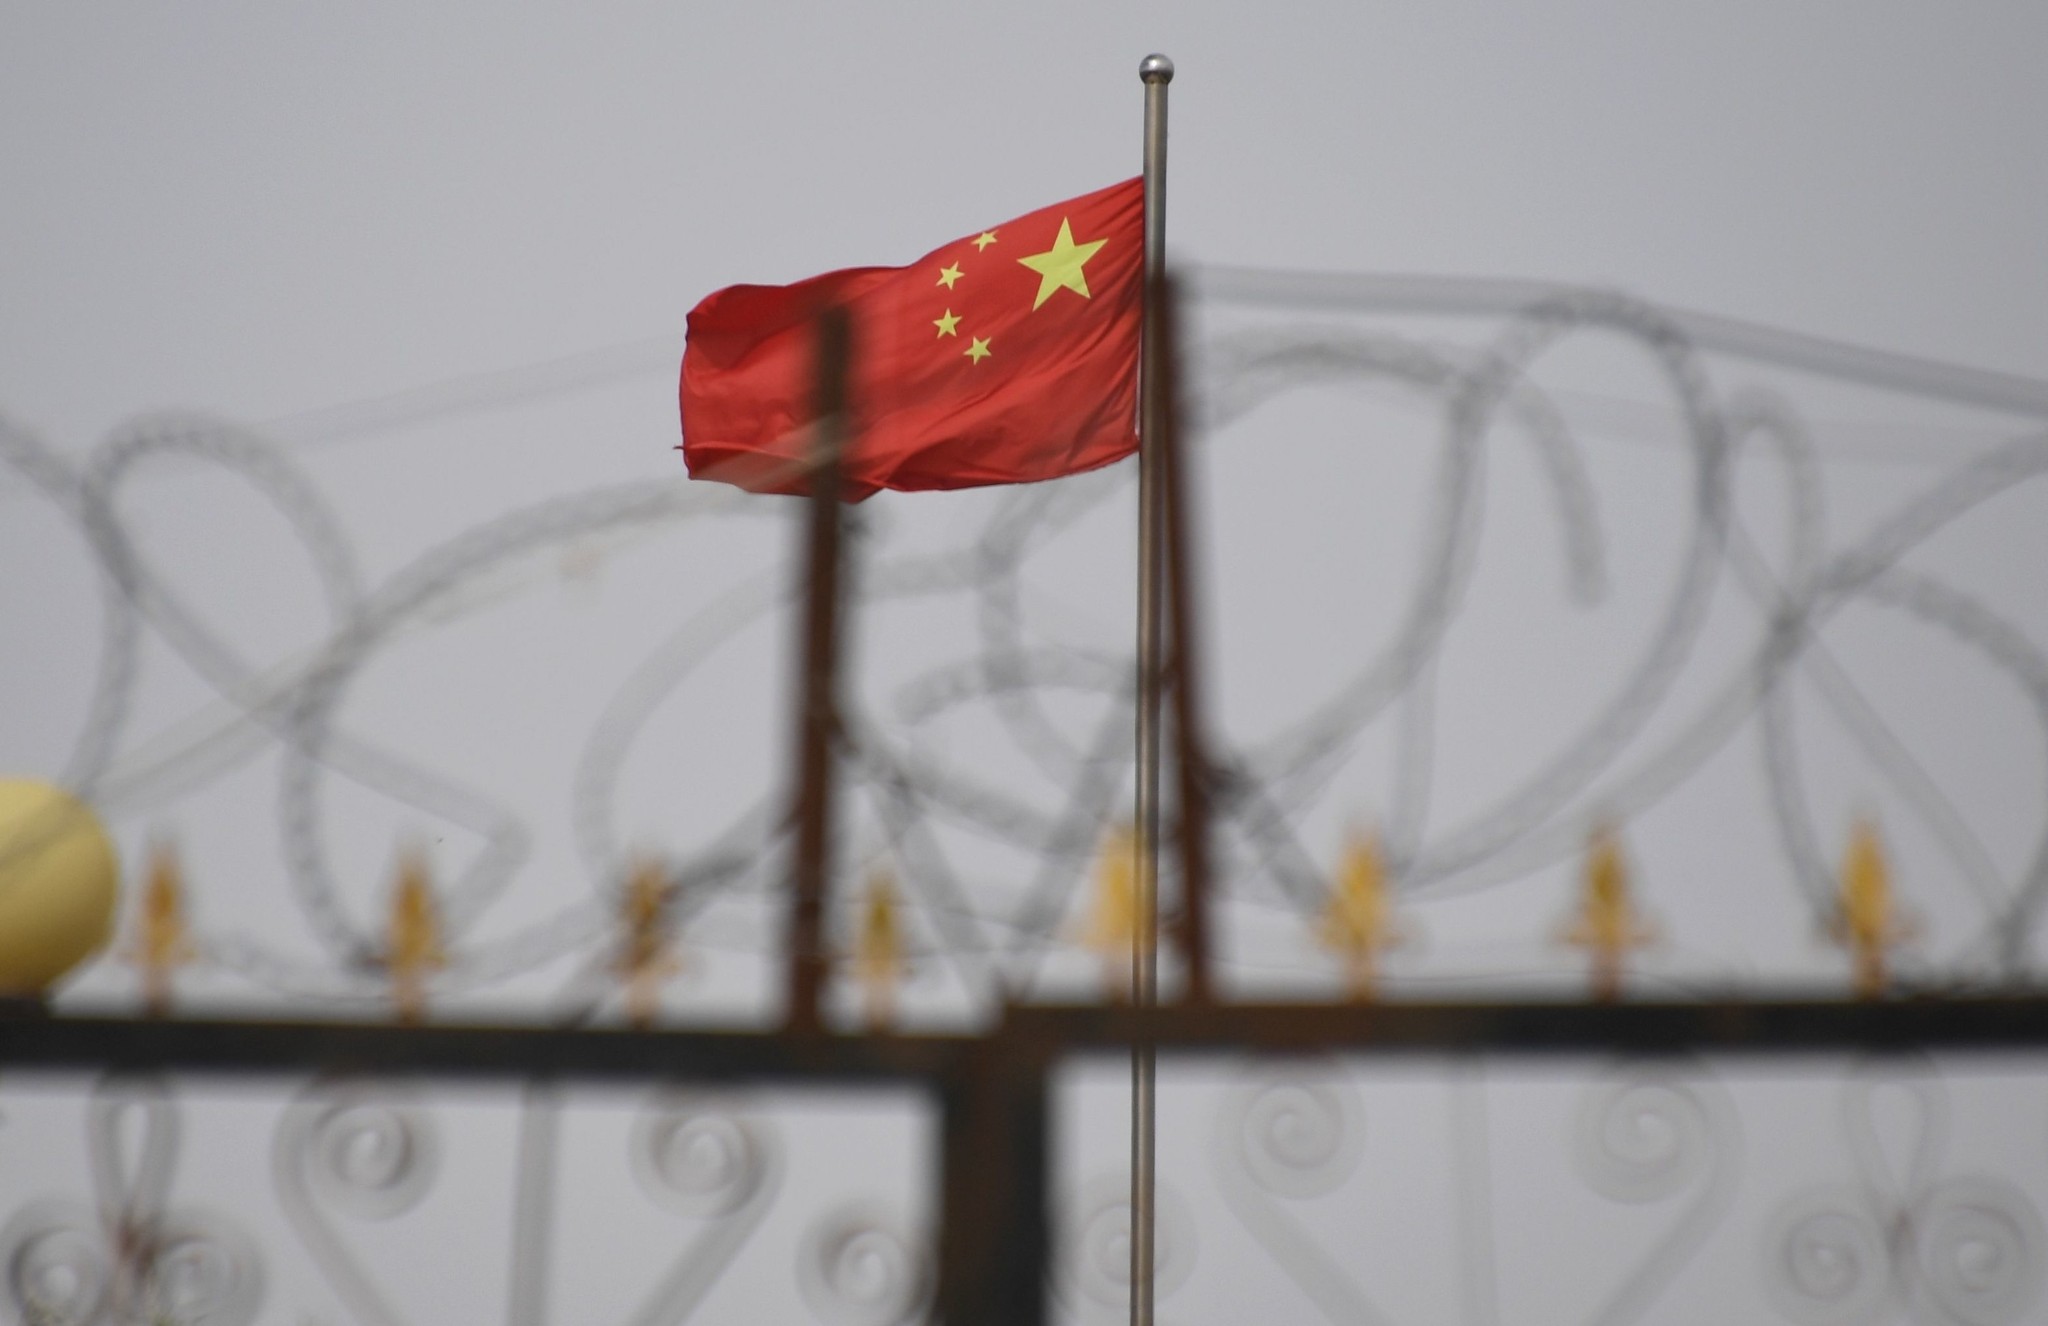 China Secretly Built A Vast New Infrastructure To Imprison Muslims